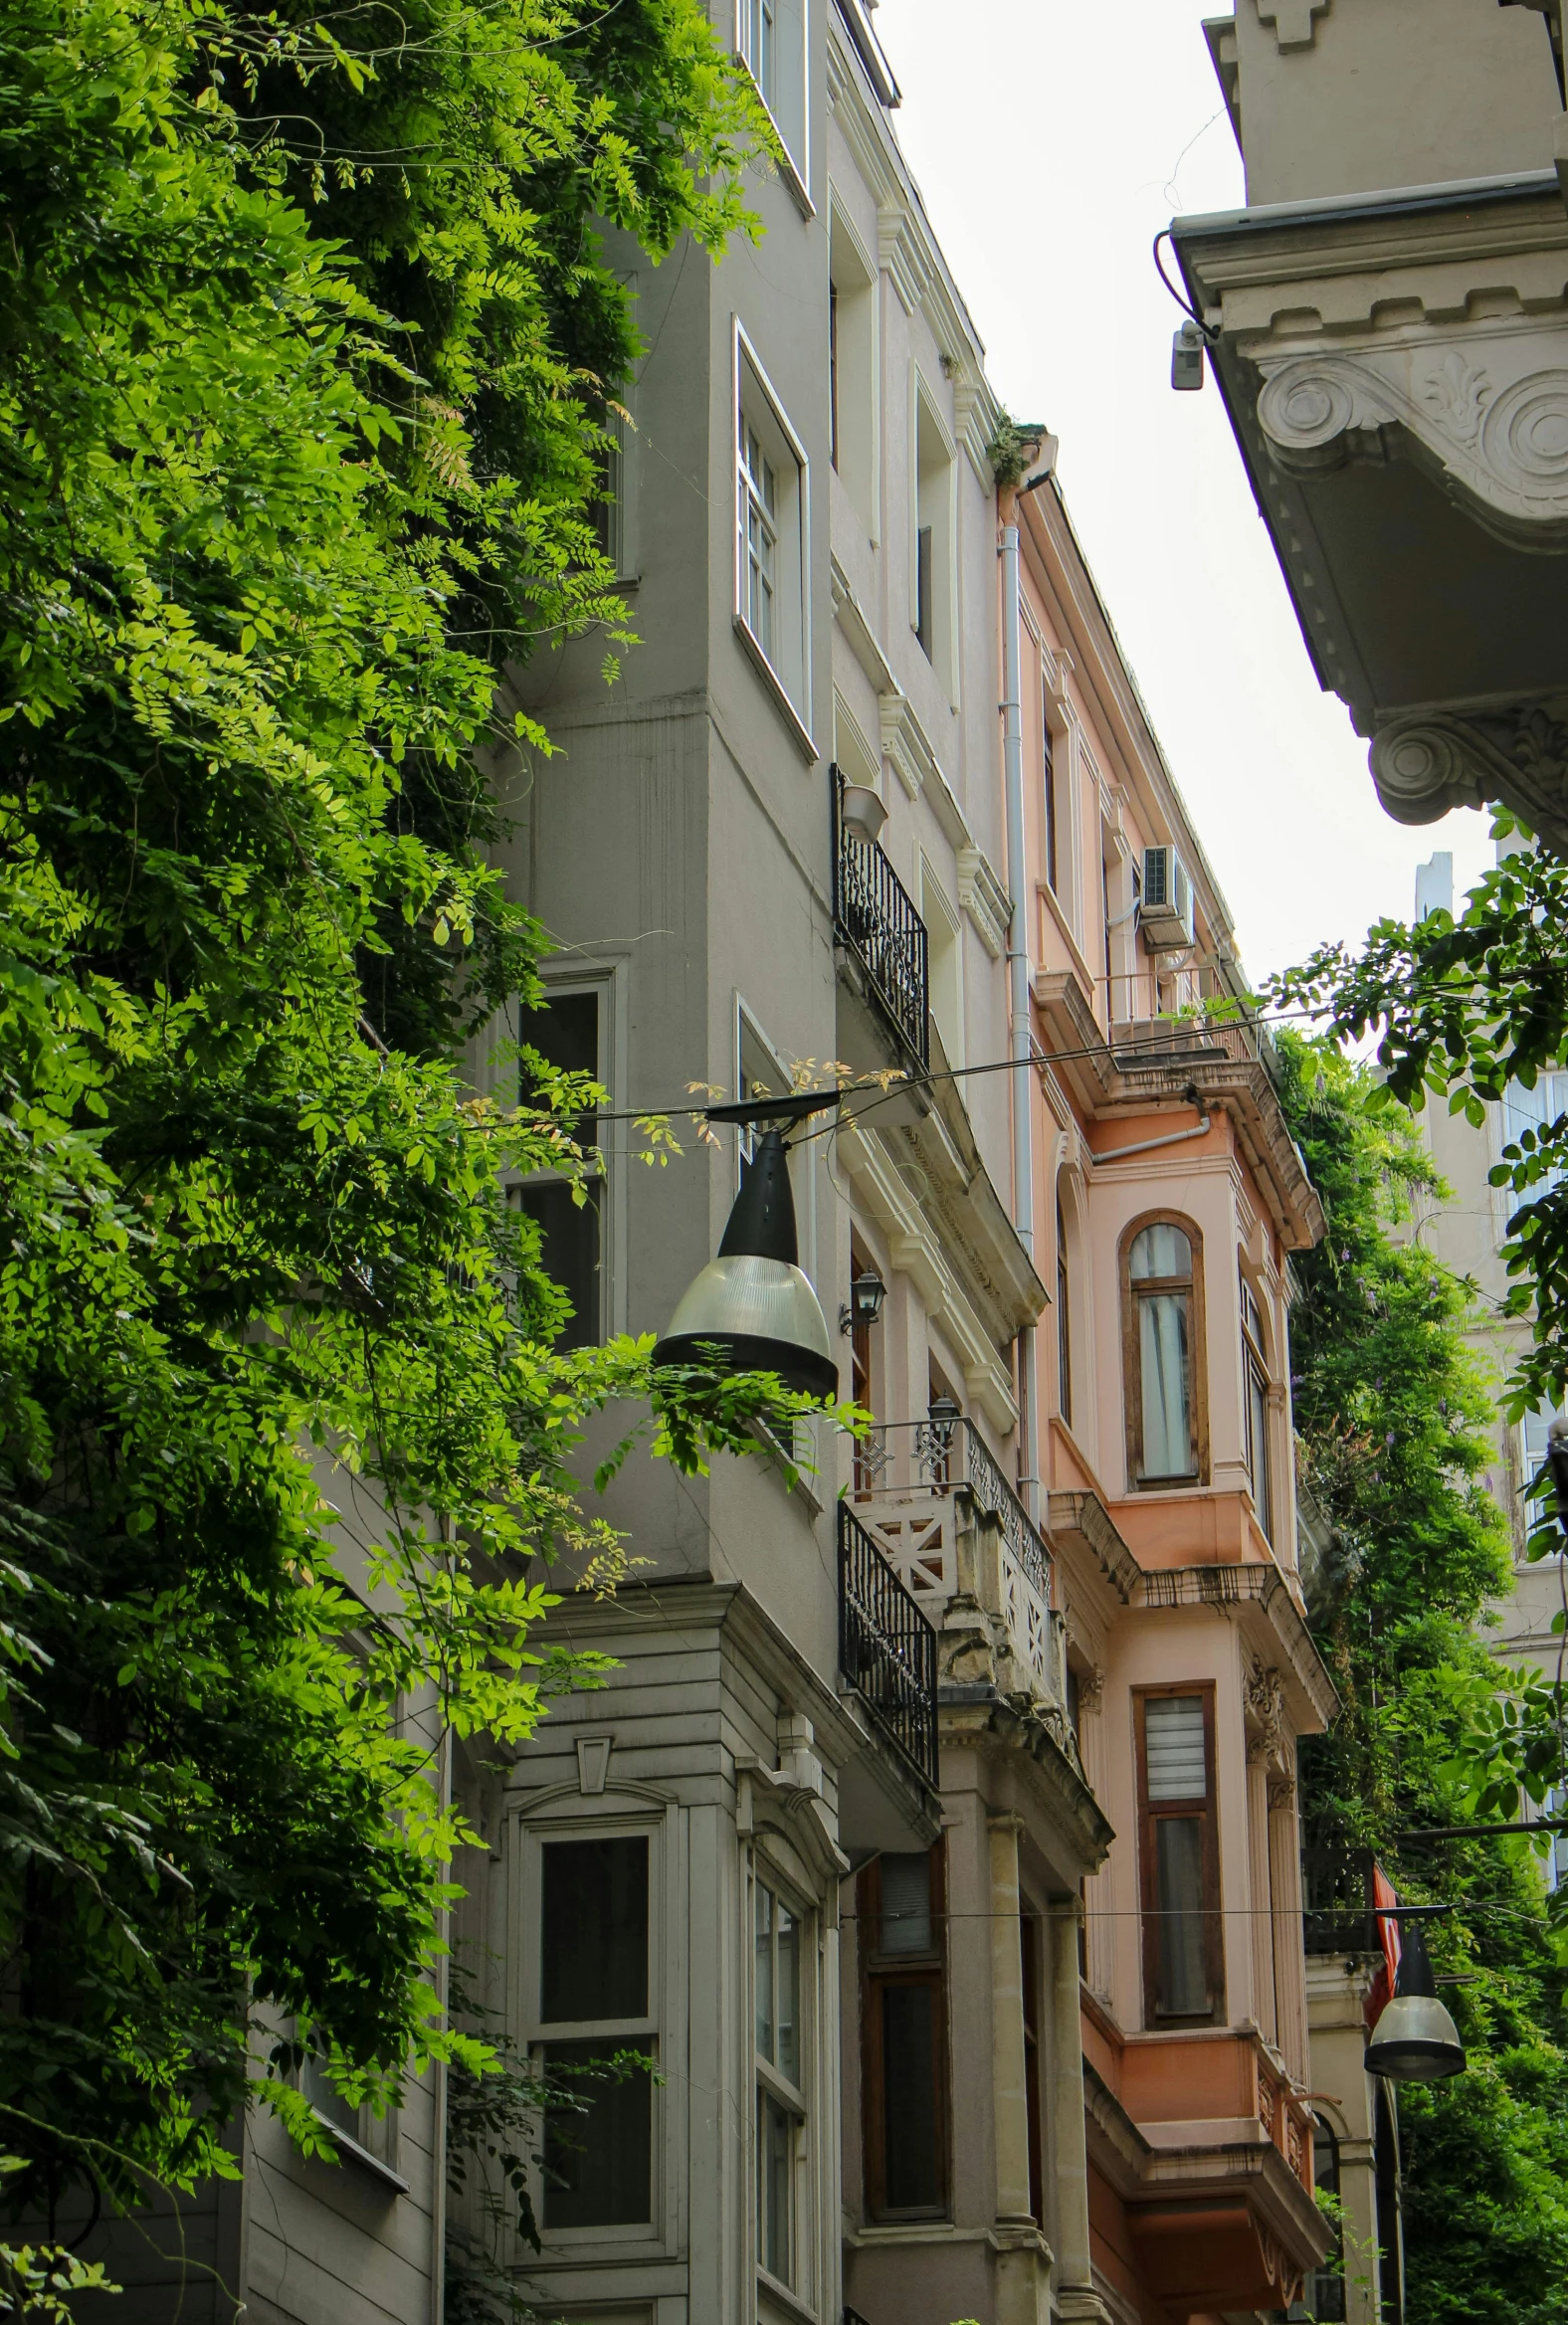 the street has many different old style apartment buildings